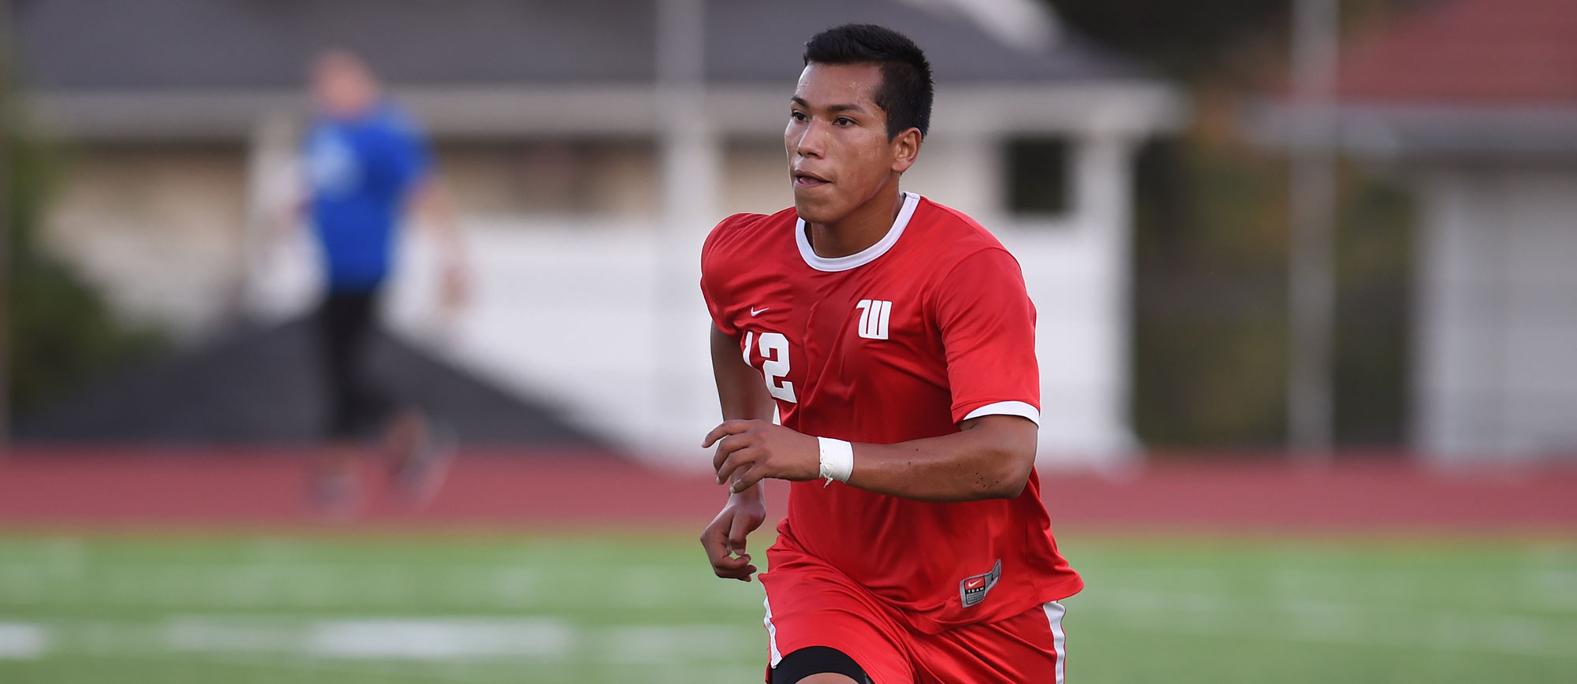 Alberto Gonzalez and the Tigers pushed 17th-ranked DePauw to overtime before losing 3-2. File Photo | Nick Falzerano